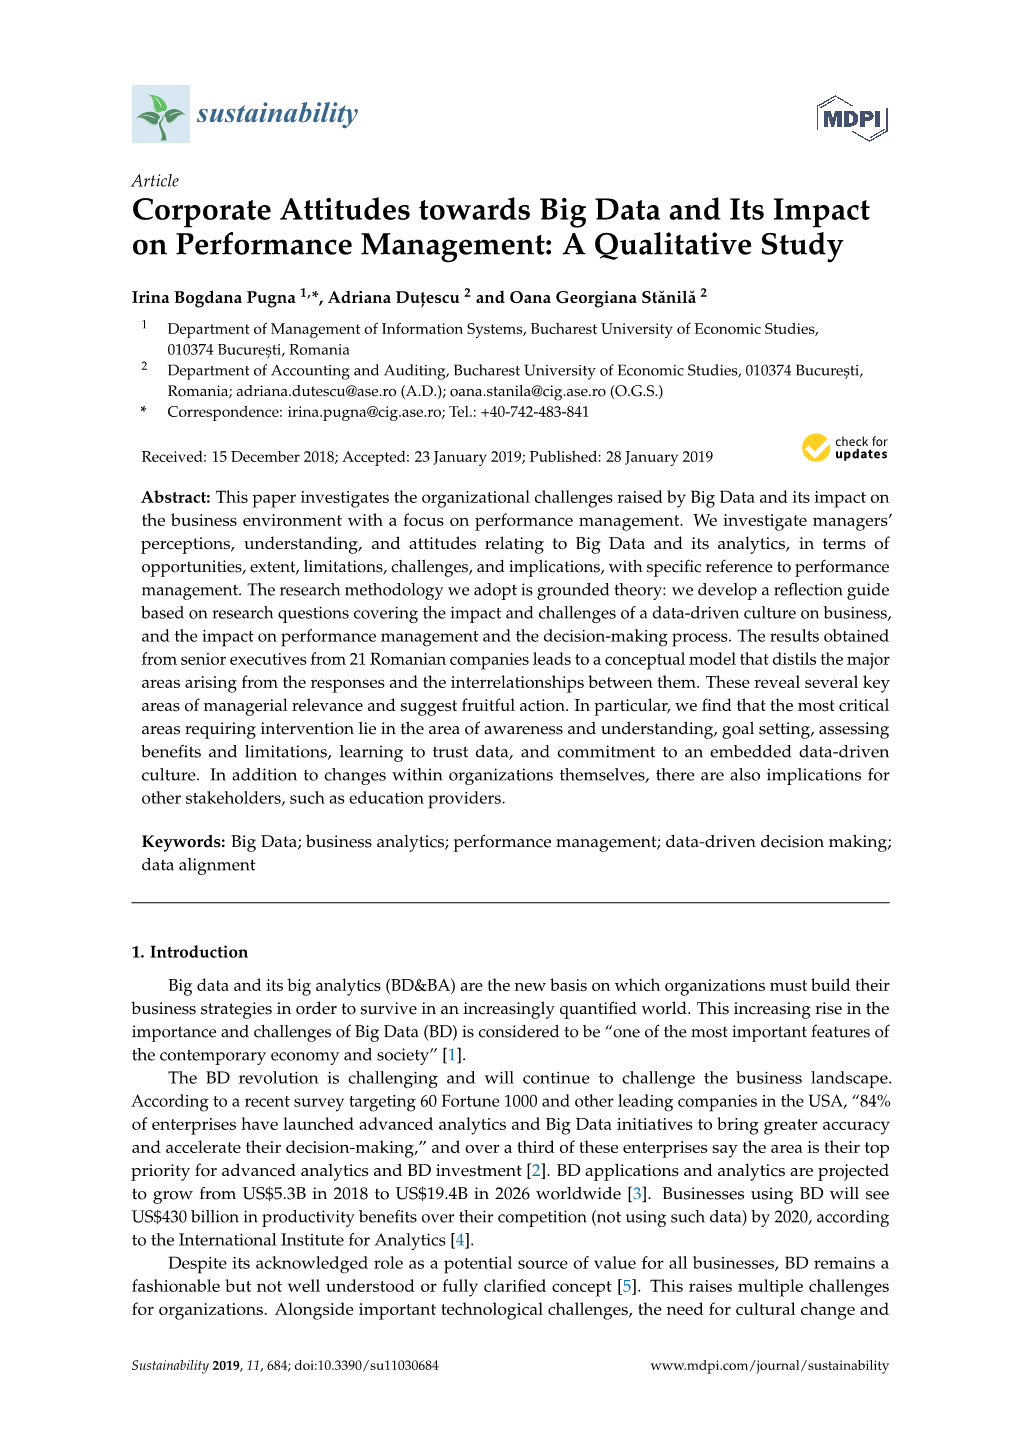 Corporate Attitudes Towards Big Data and Its Impact on Performance Management: a Qualitative Study